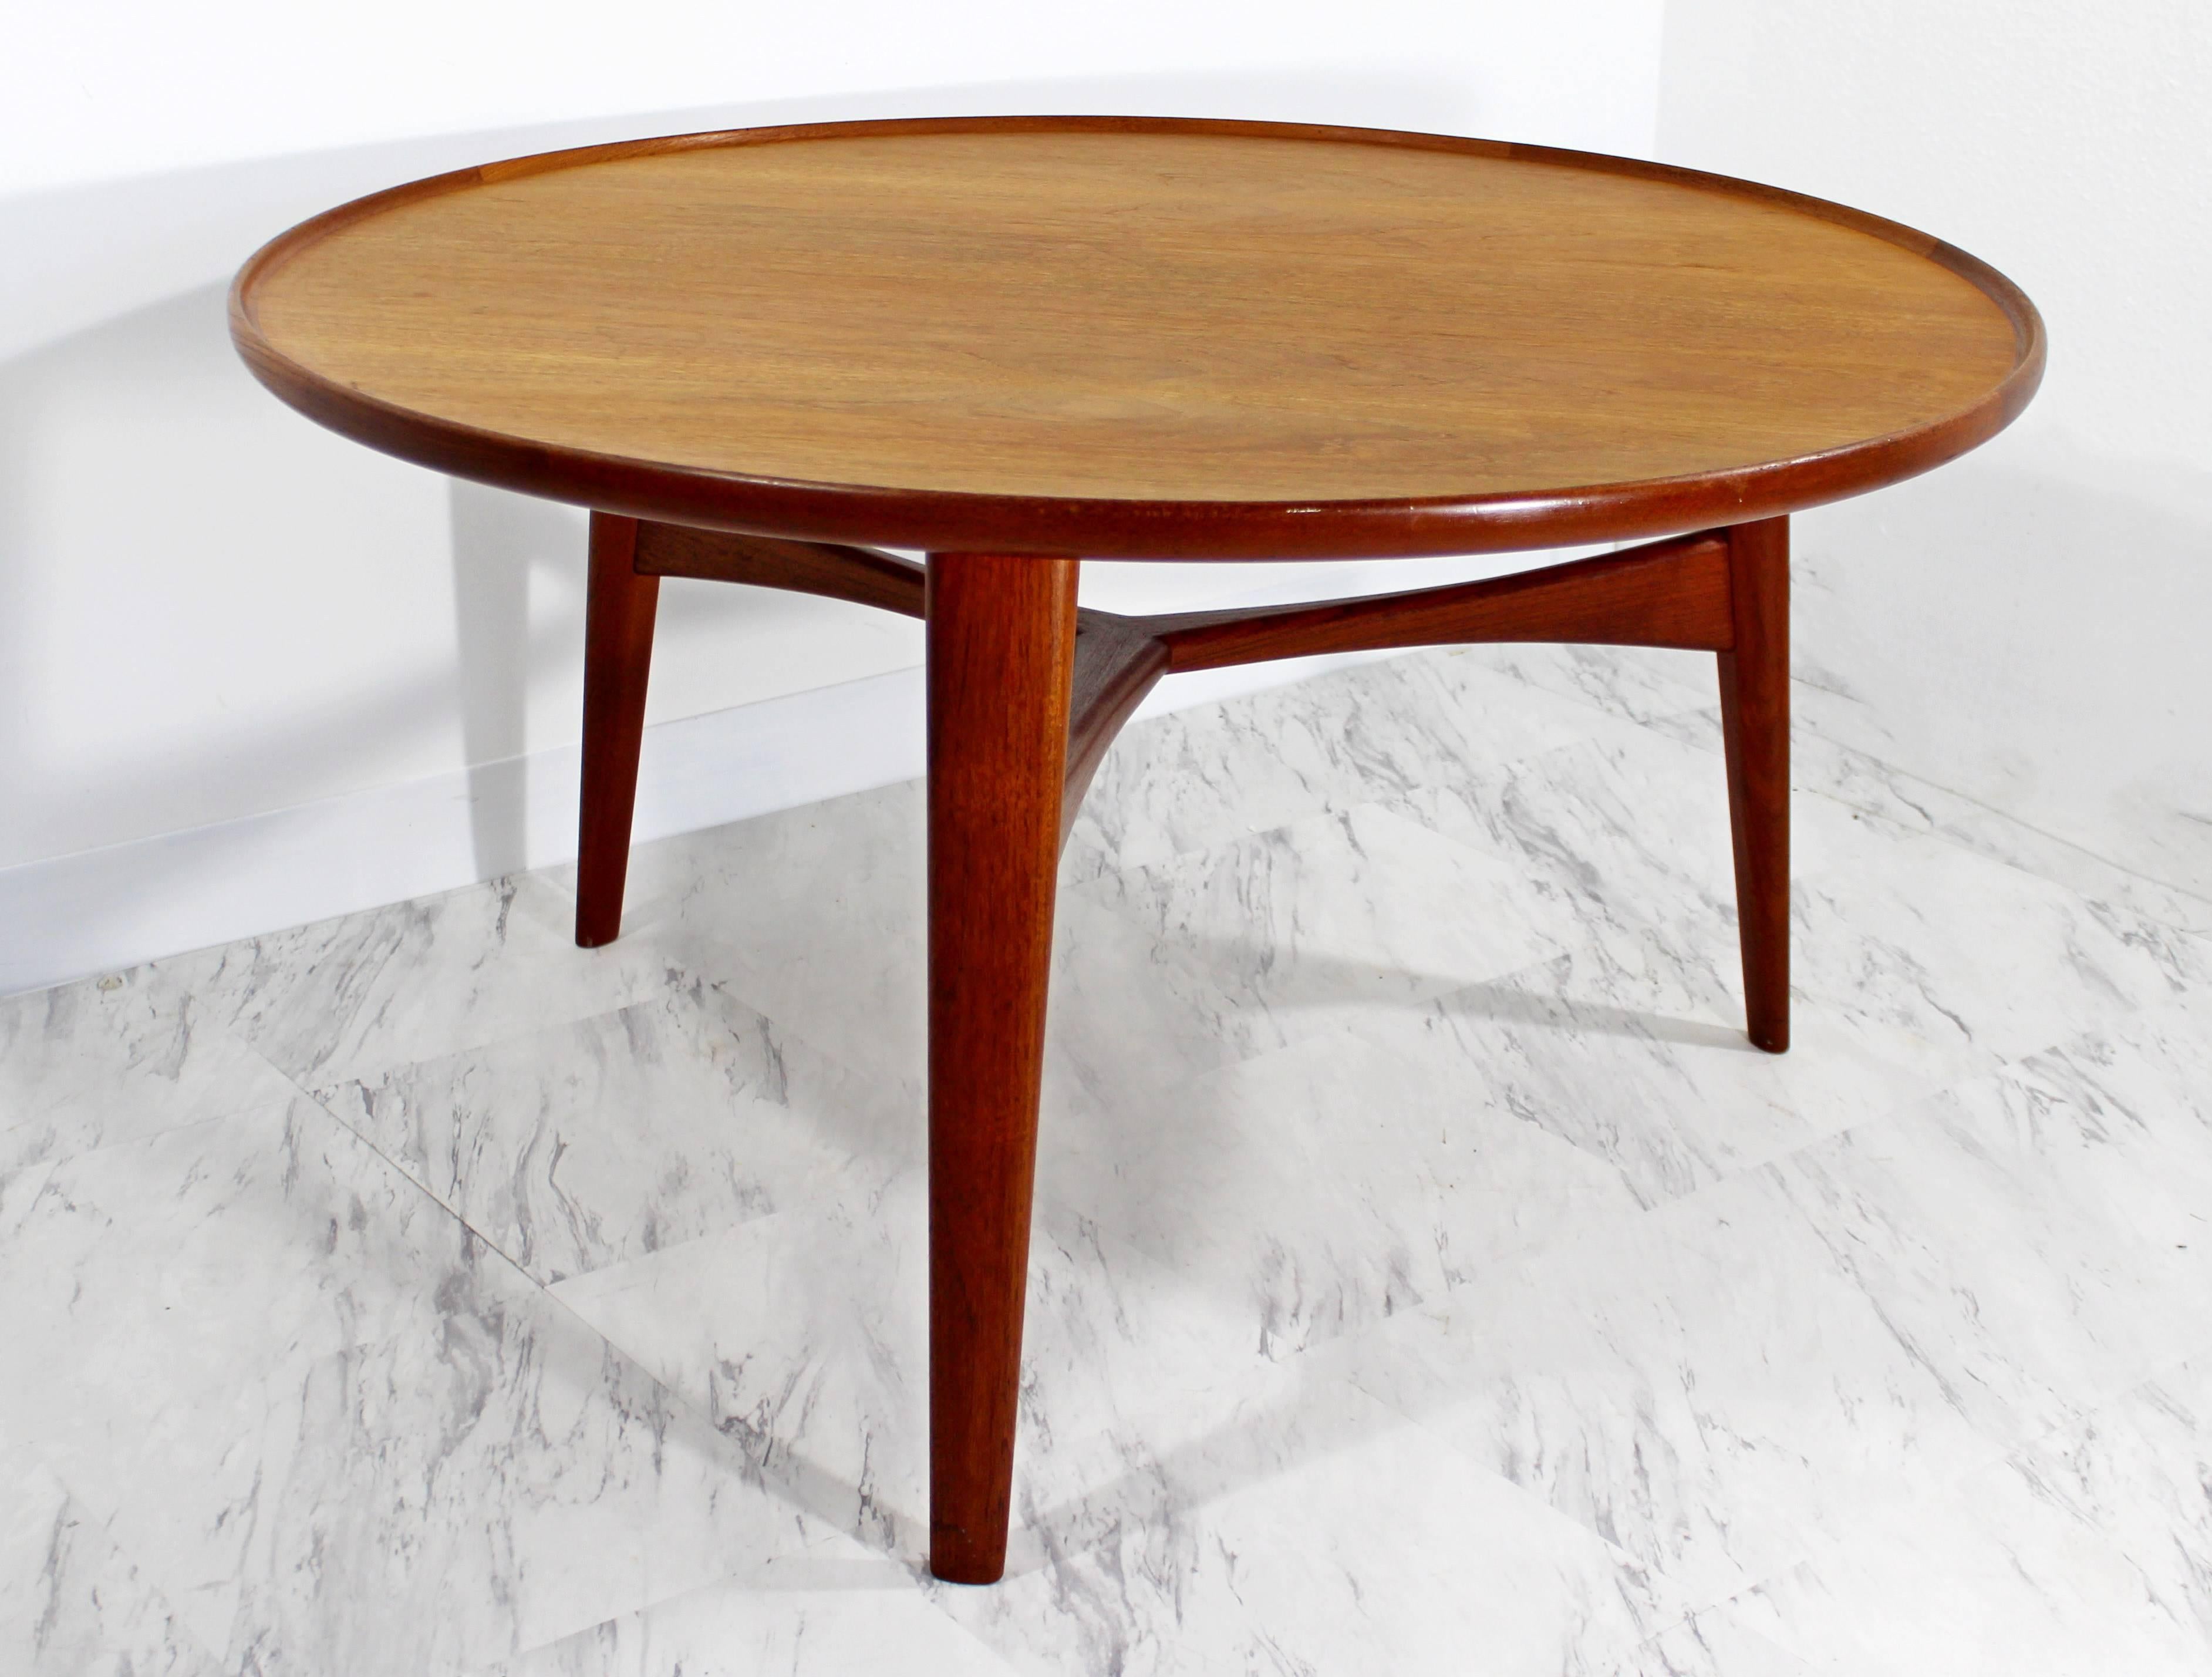 Danish teak circular table with a lipped edge raised on three circular tapered legs joined by a tripartite stretcher. Designed by Aksel Bender Madsen and Ejner Larsen. Produced by Willy Beck, Copenhagen. Original label. In very good condition. The